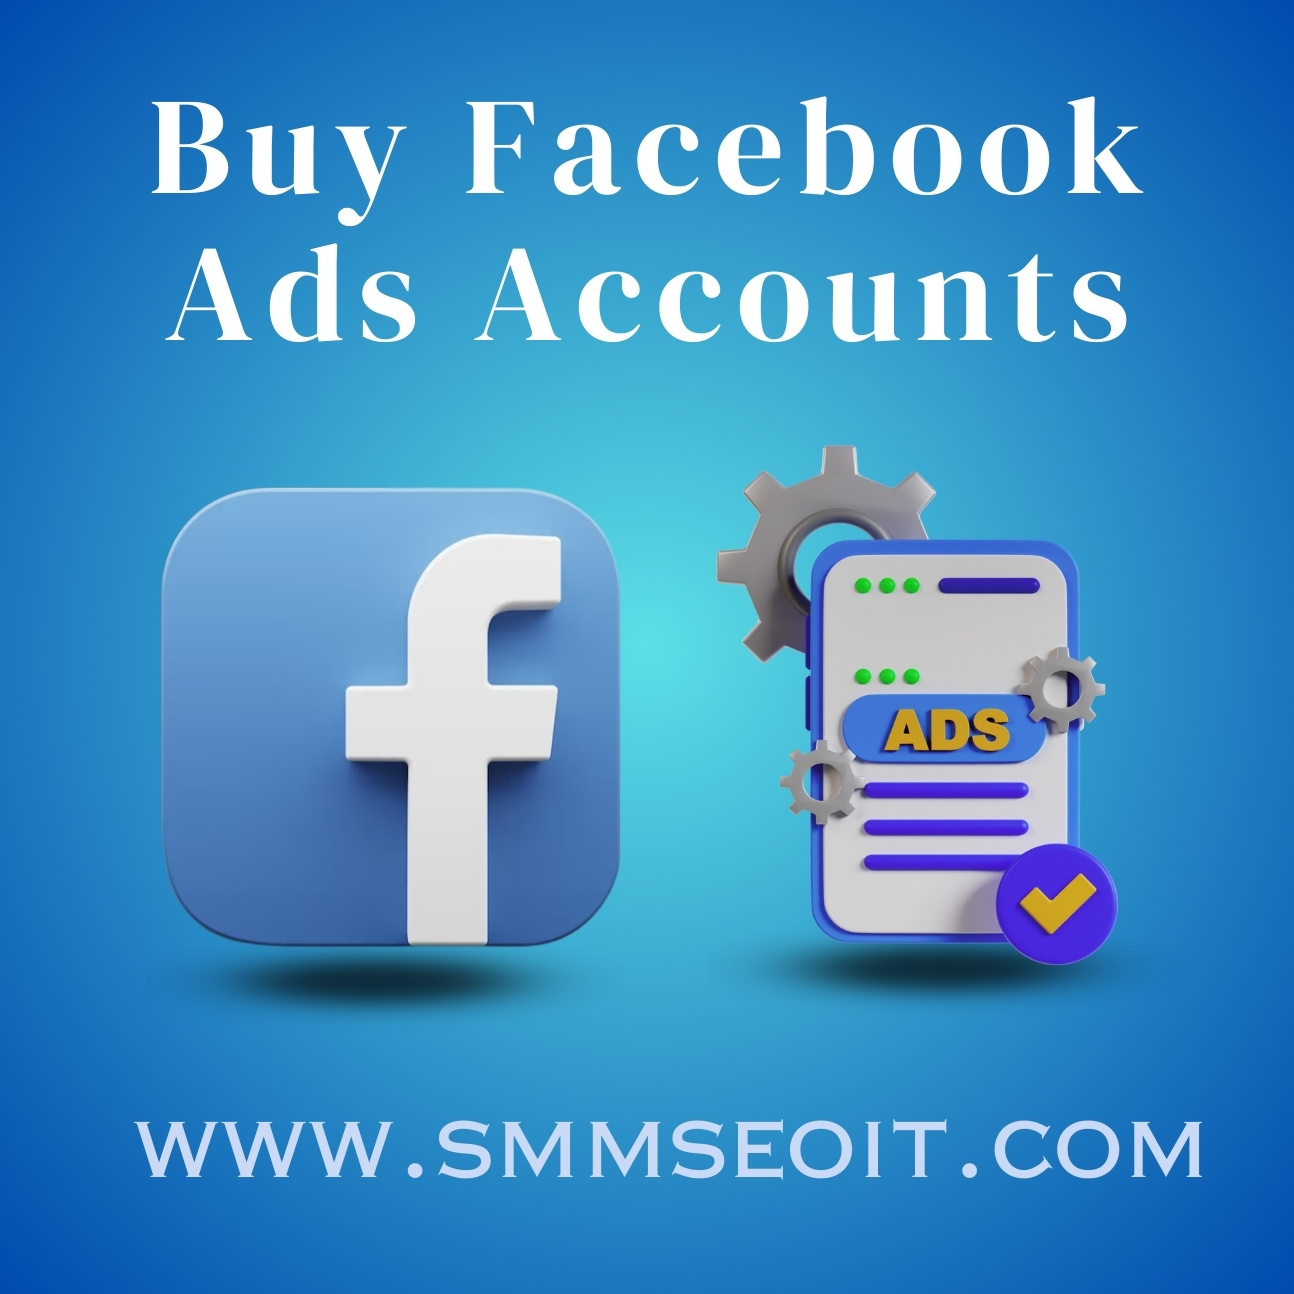 Buy Facebook Ads Accounts - Old and High Quality Account